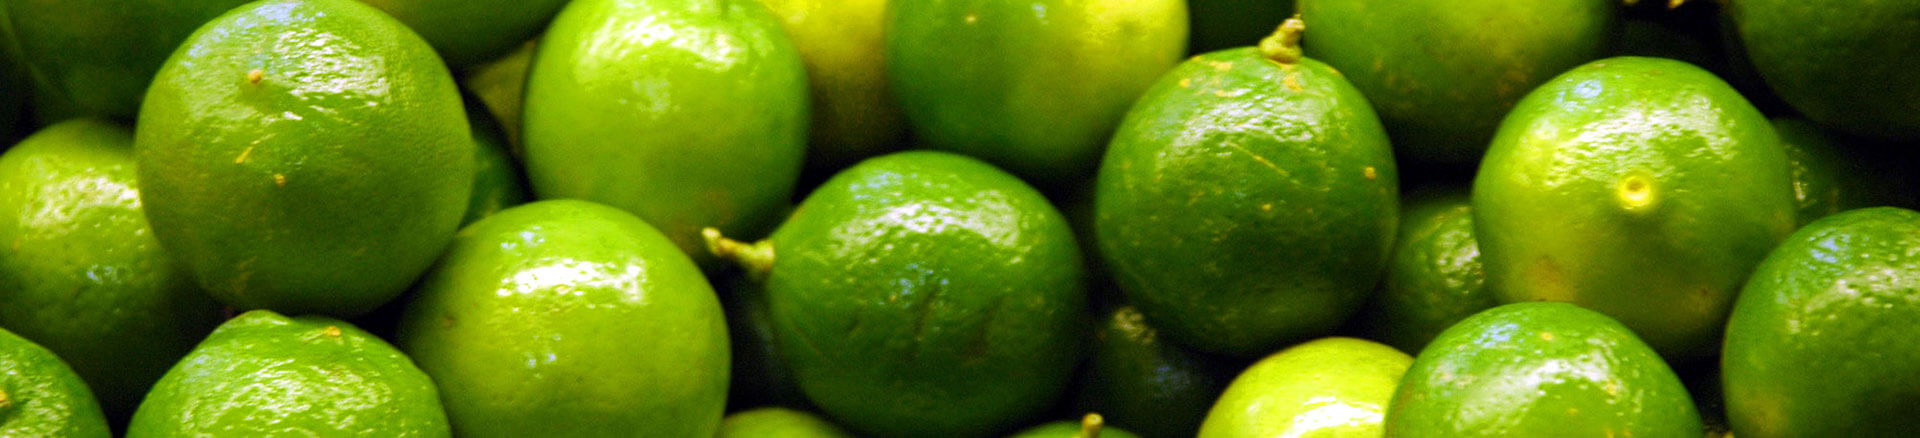 Crop of organically grown lime